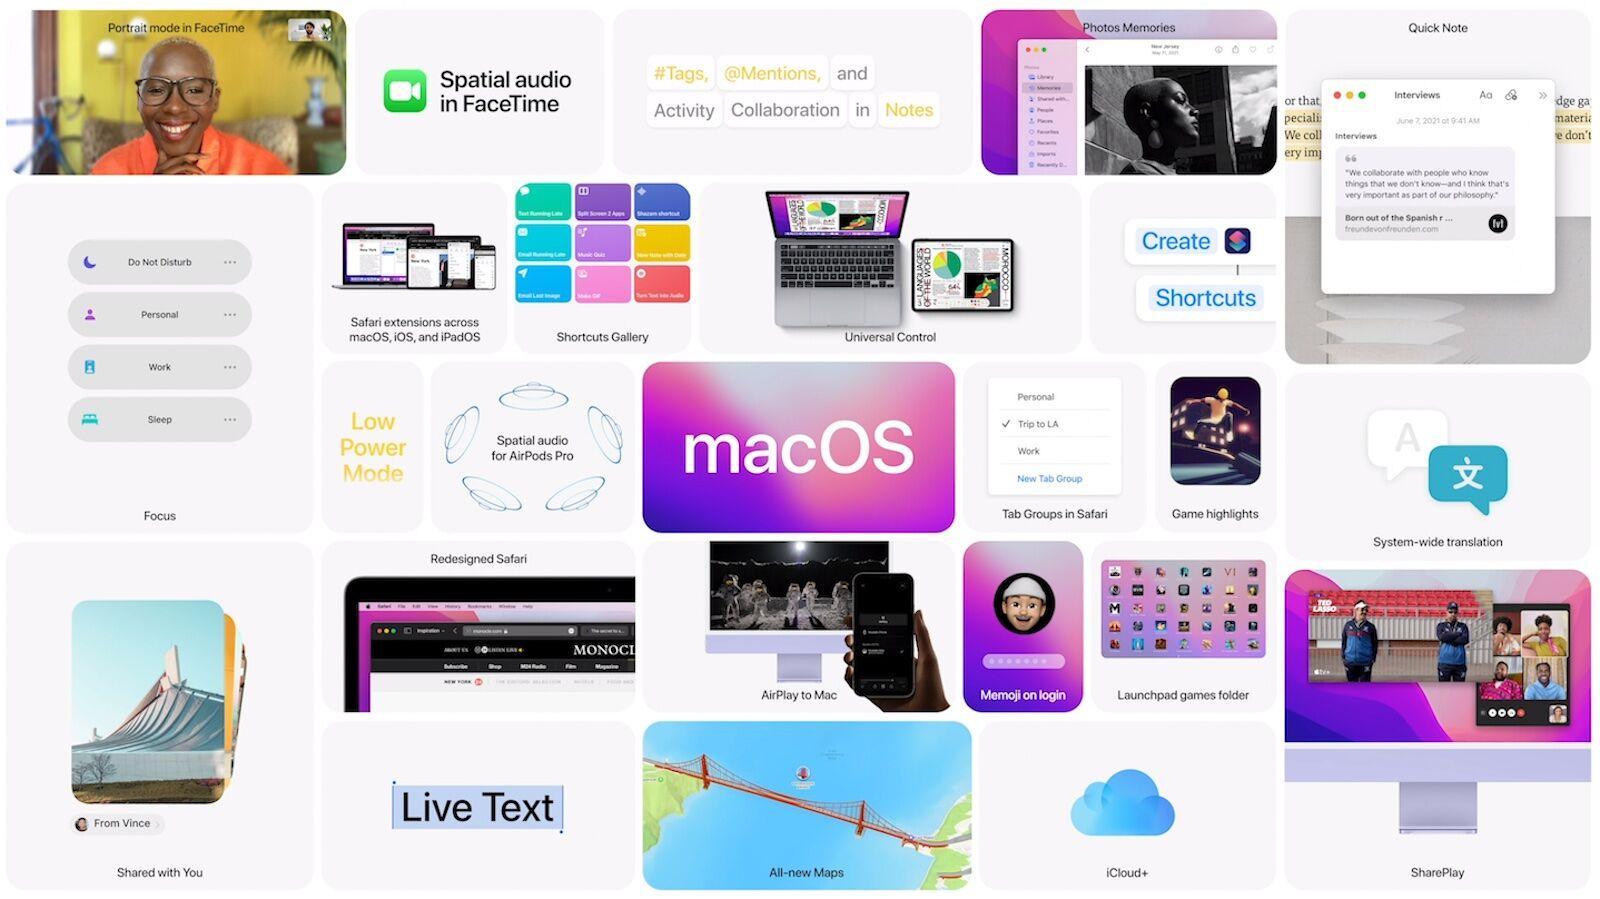 New features in MacOS